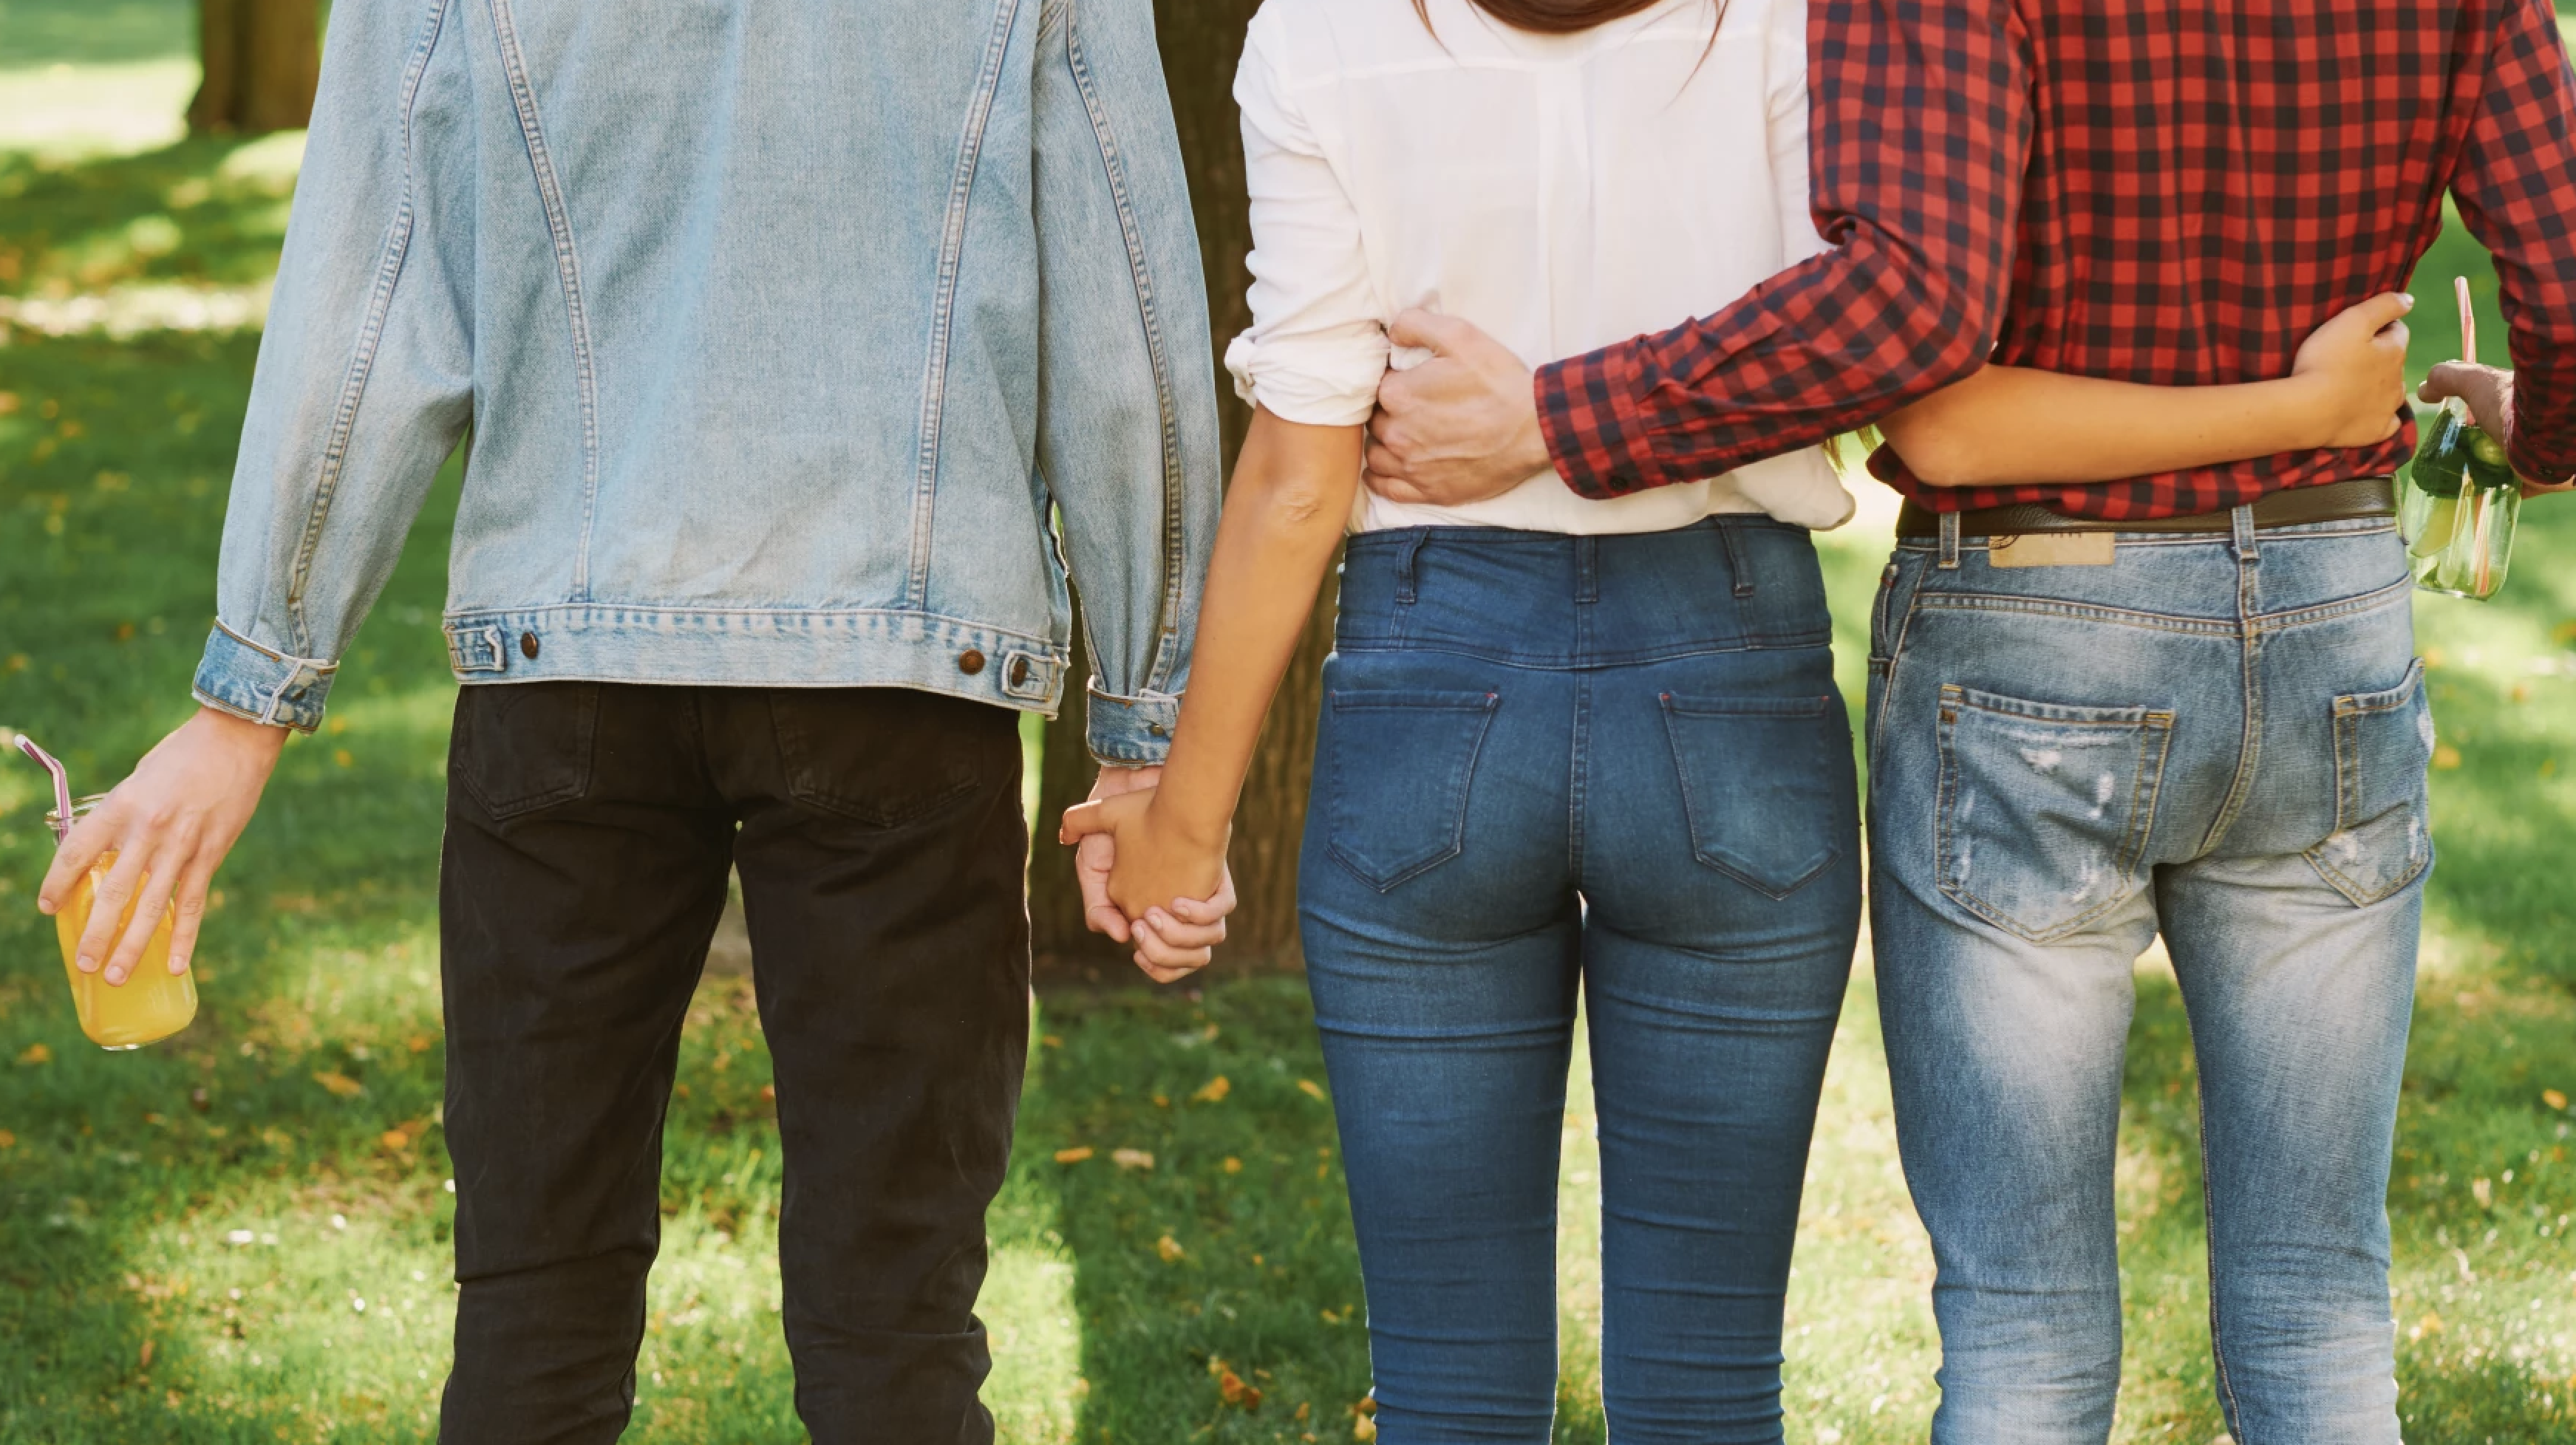 Non-monogamous relationships: the good, the bad, the reality